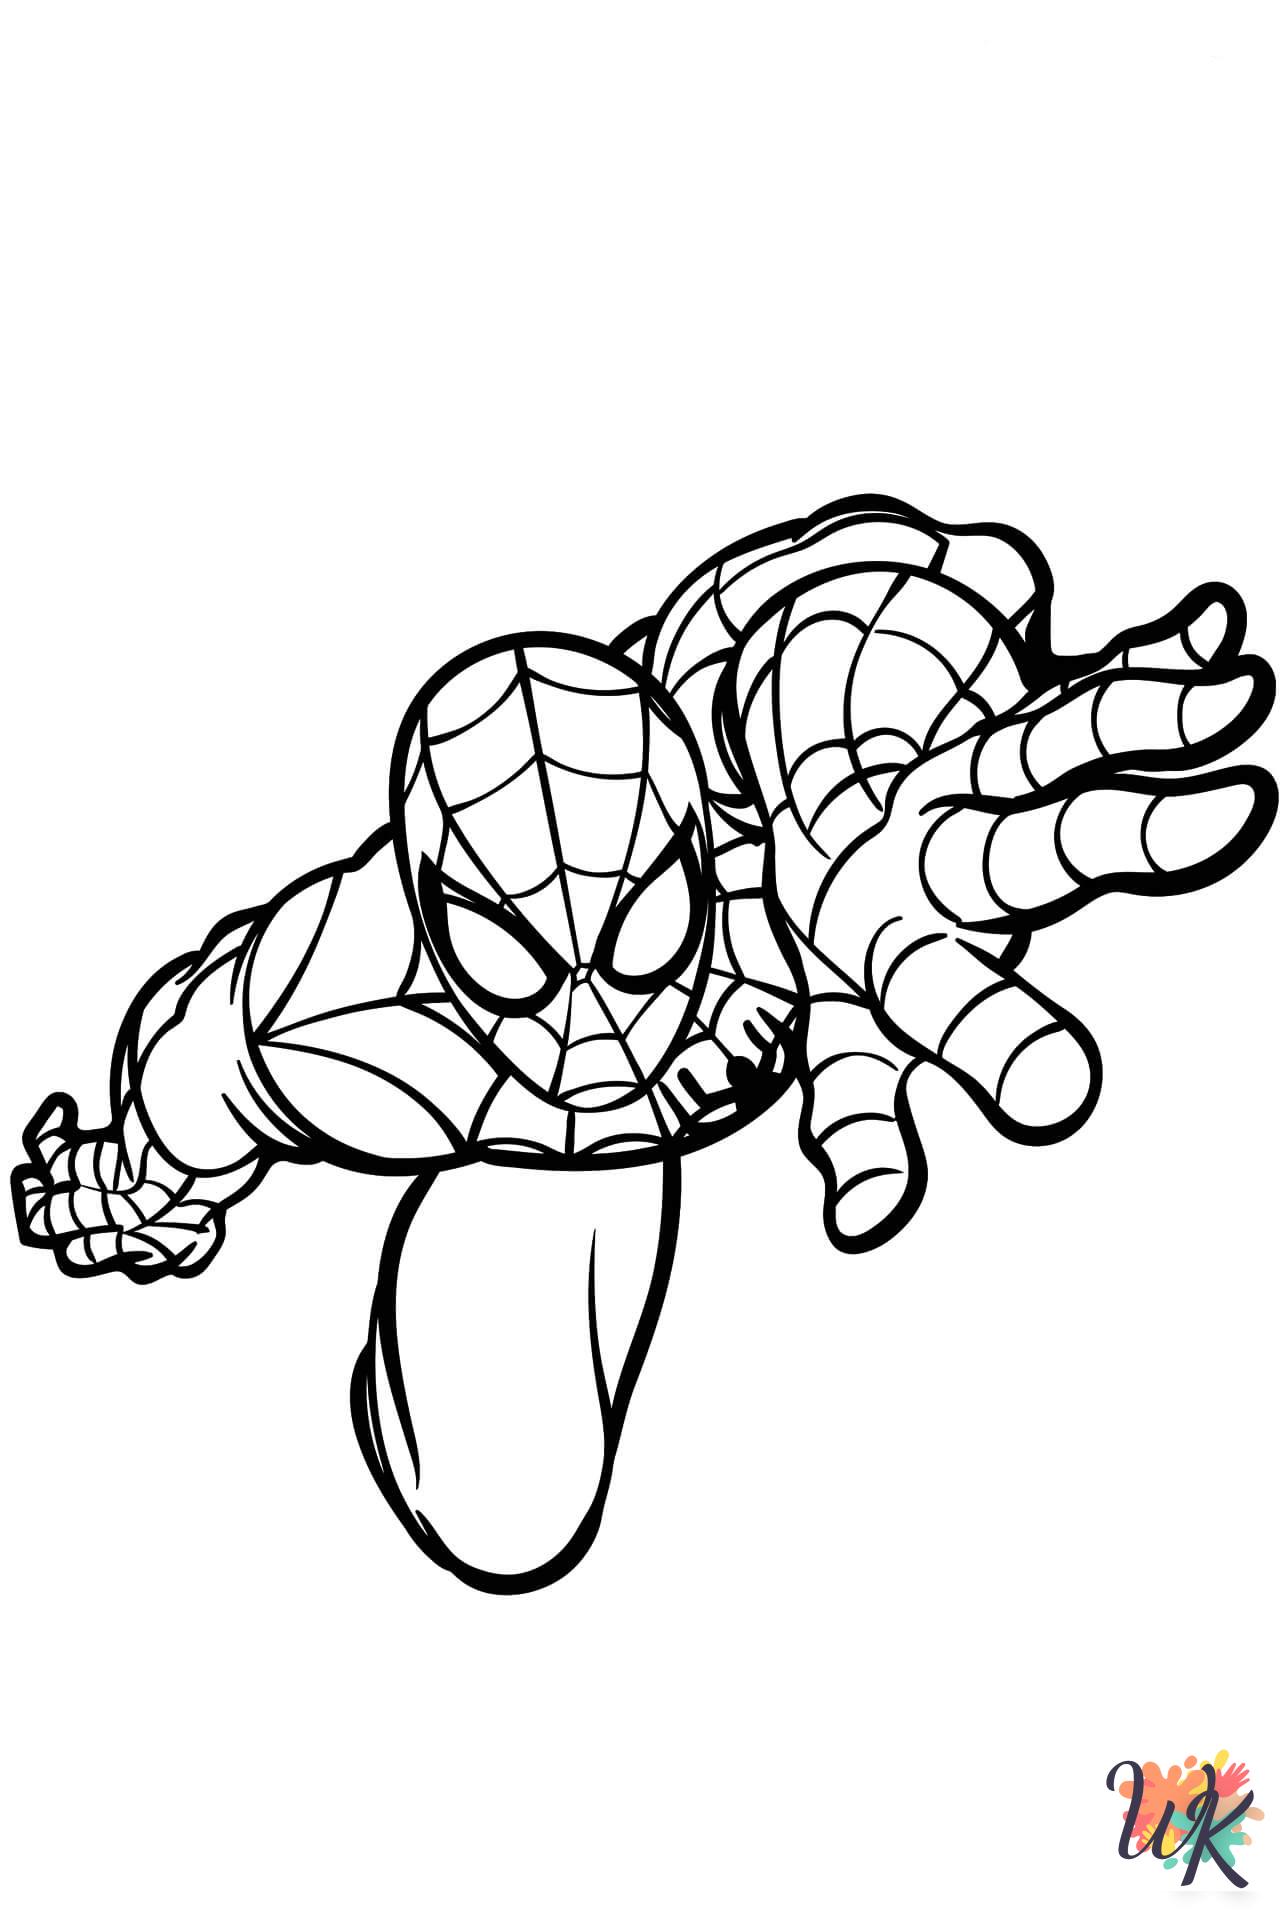 Spiderman coloring pages to print